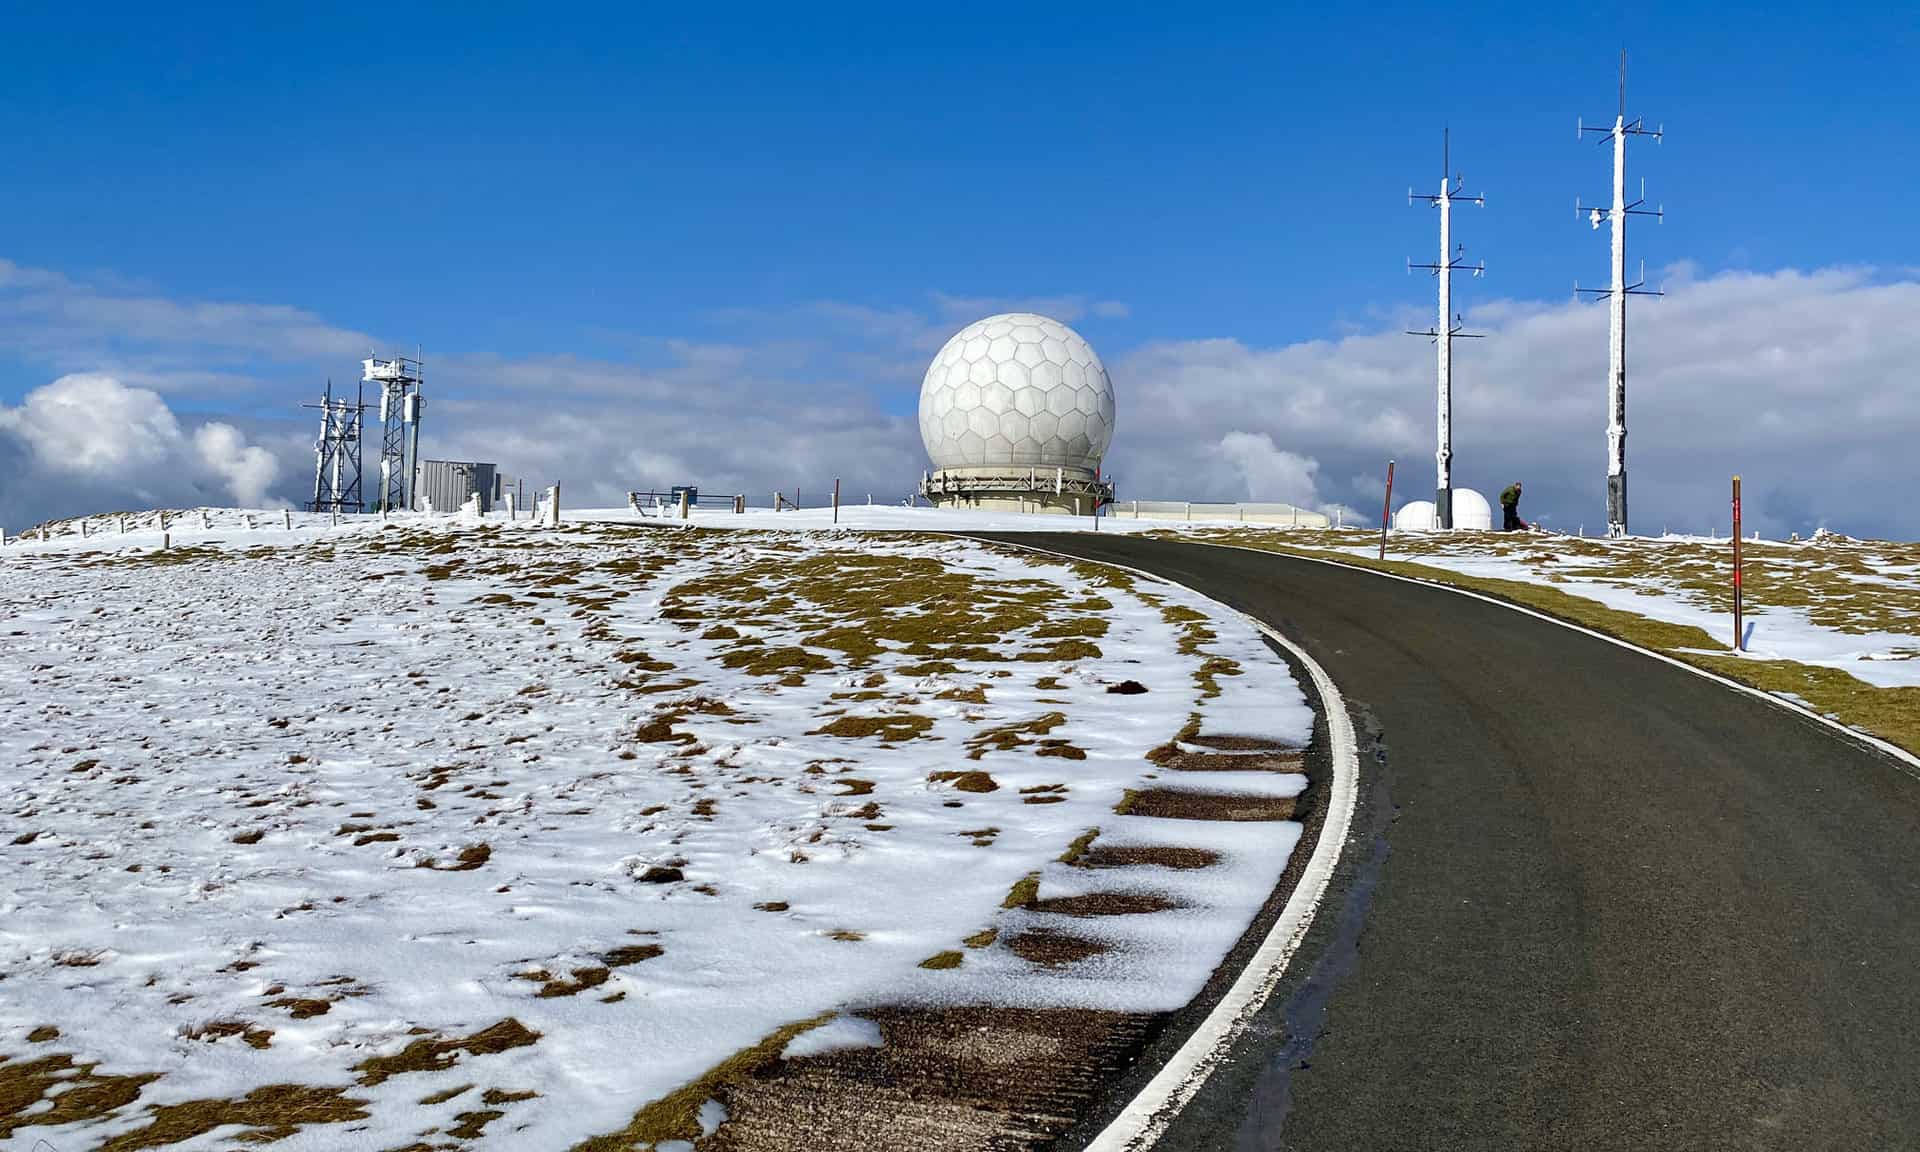 A few pictures of the radar station at the top of Great Dun Fell, height 848 metres (2782 feet).